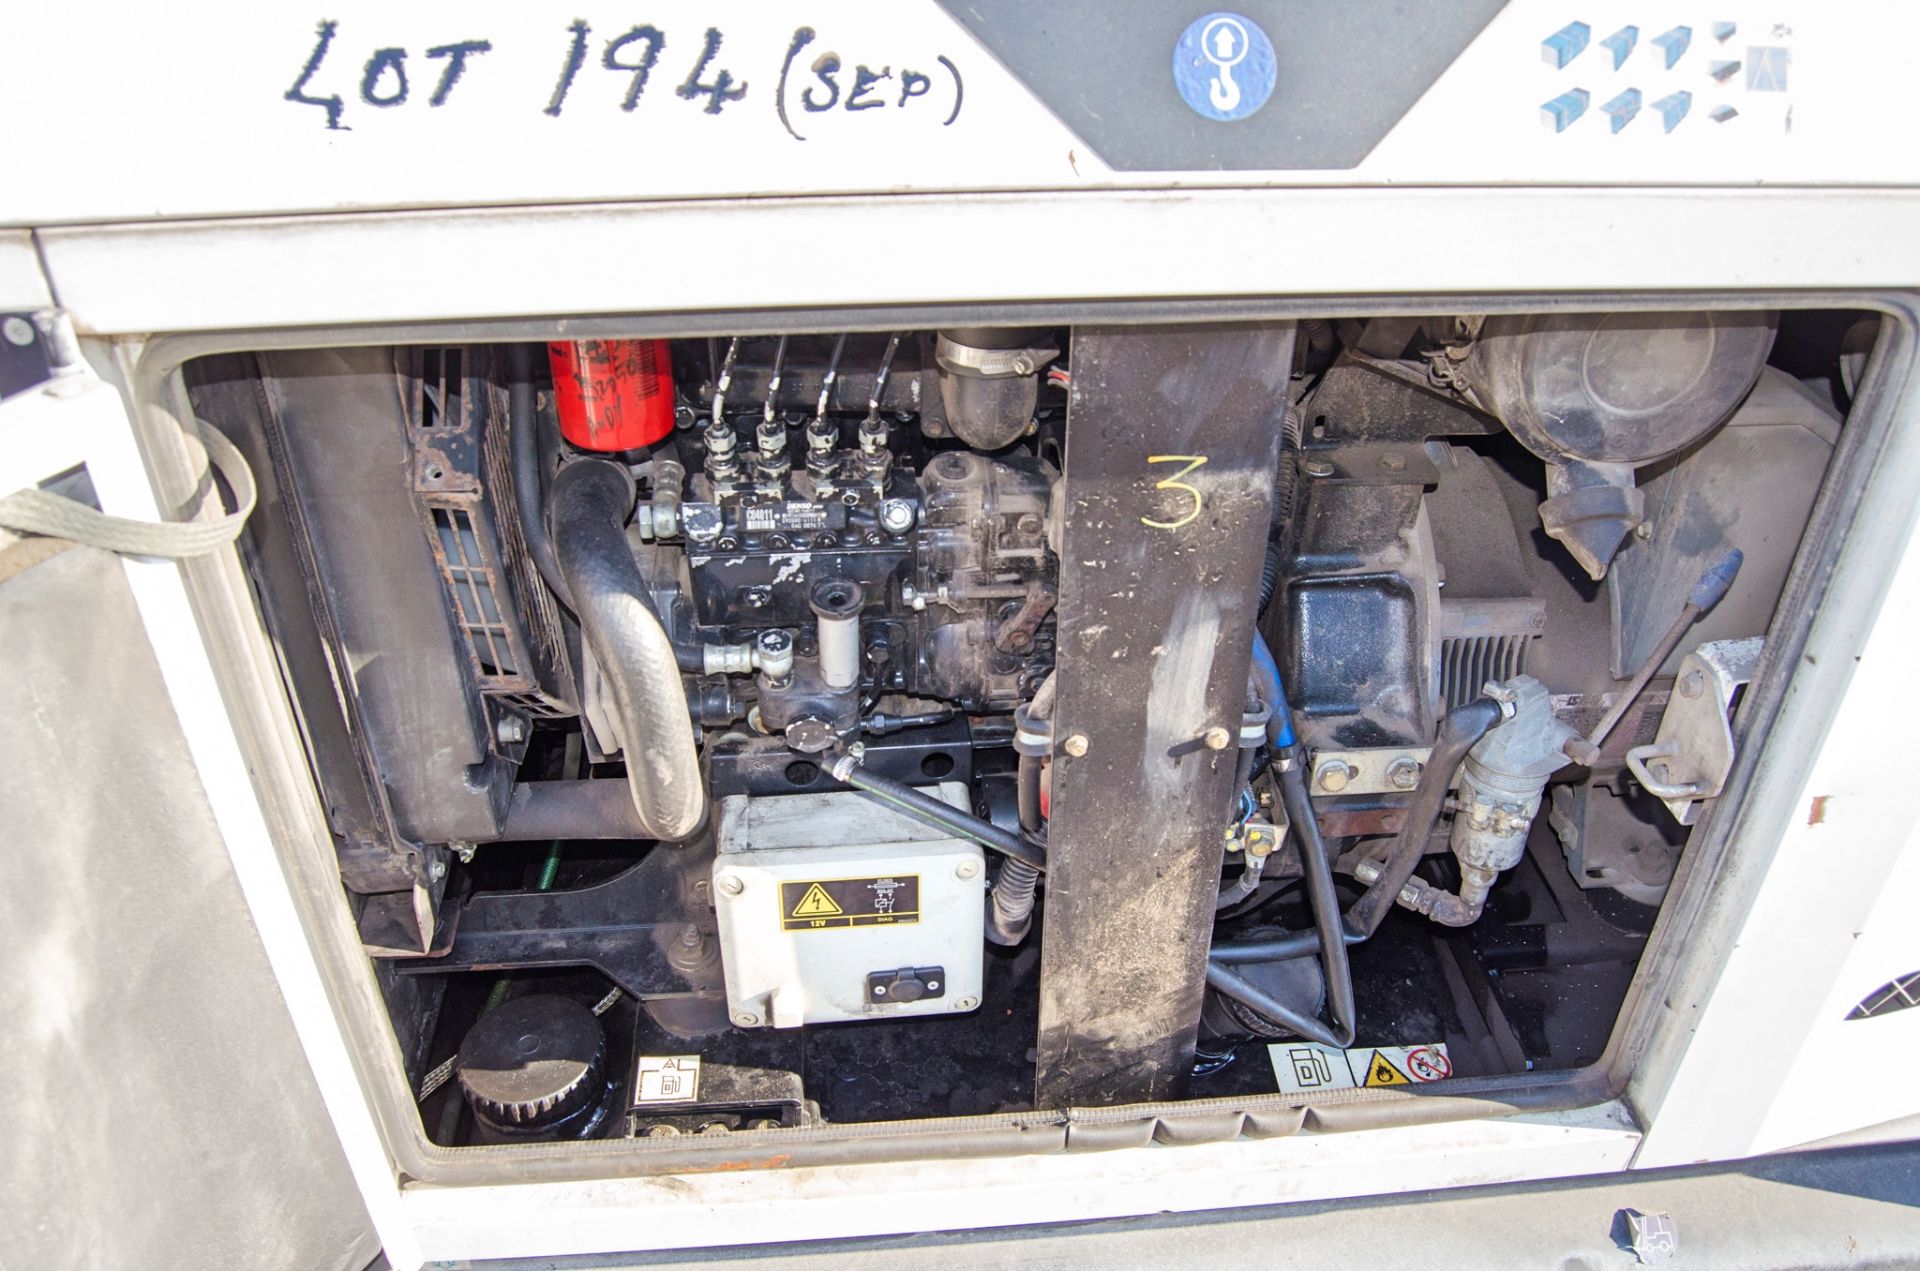 SDMO R22 22 kva diesel driven generator Recorded Hours: 14091 A635683 - Image 7 of 7